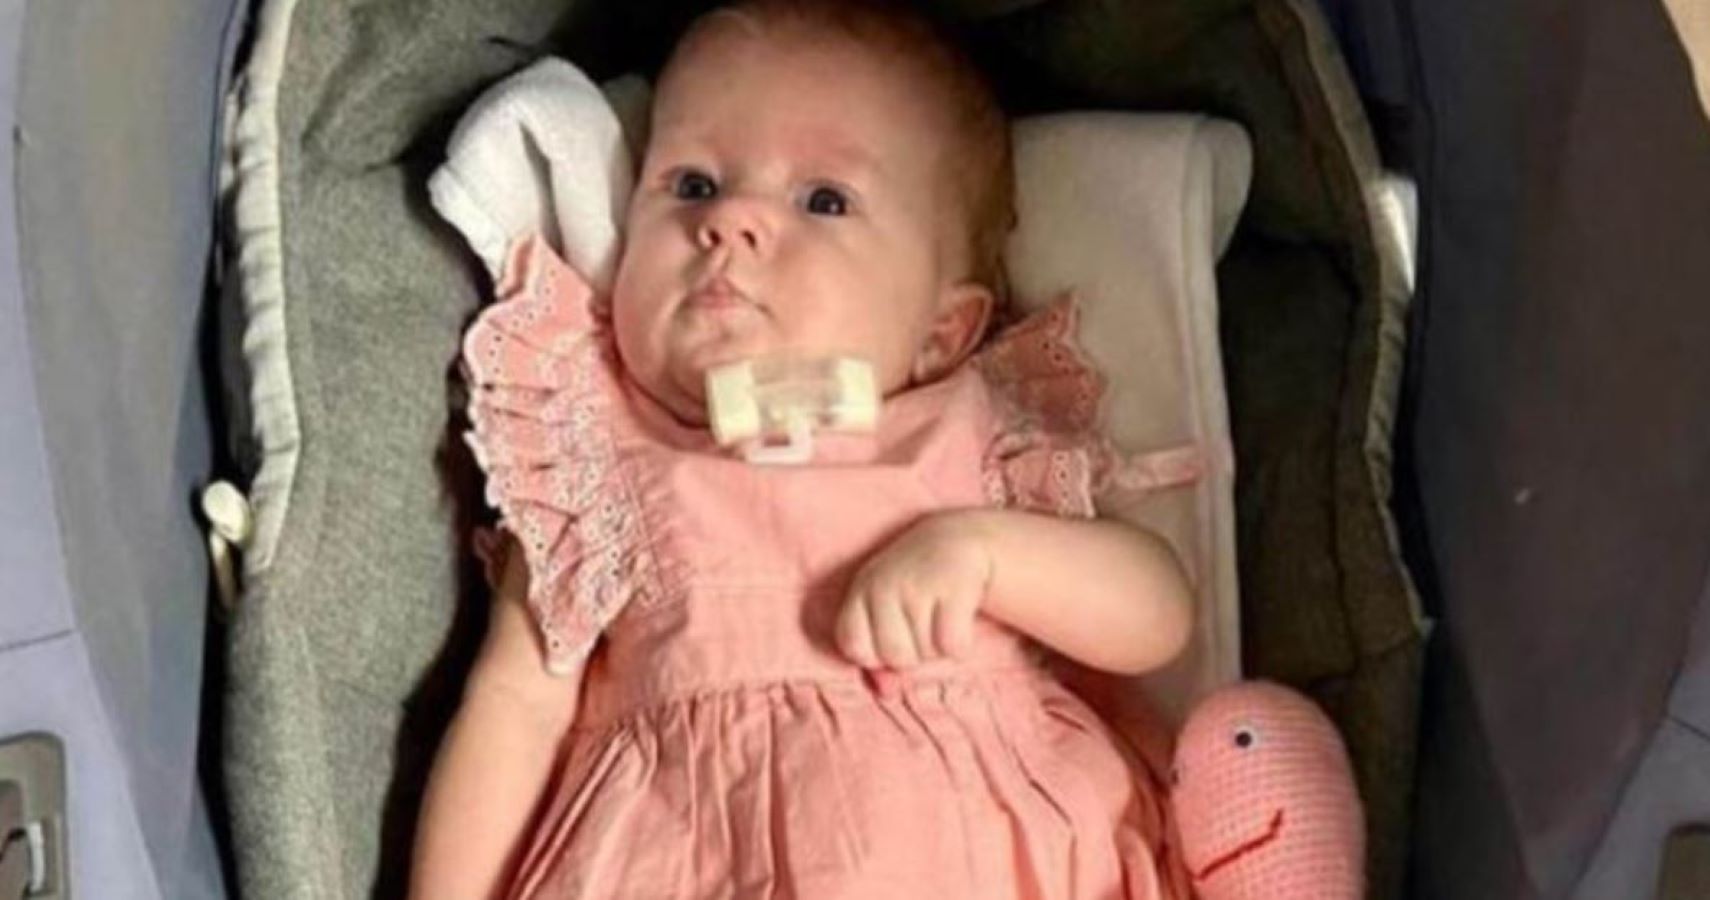 Preemie Heads Home More Than 100 Days After Her Birth: “She Is A Real Survivor”